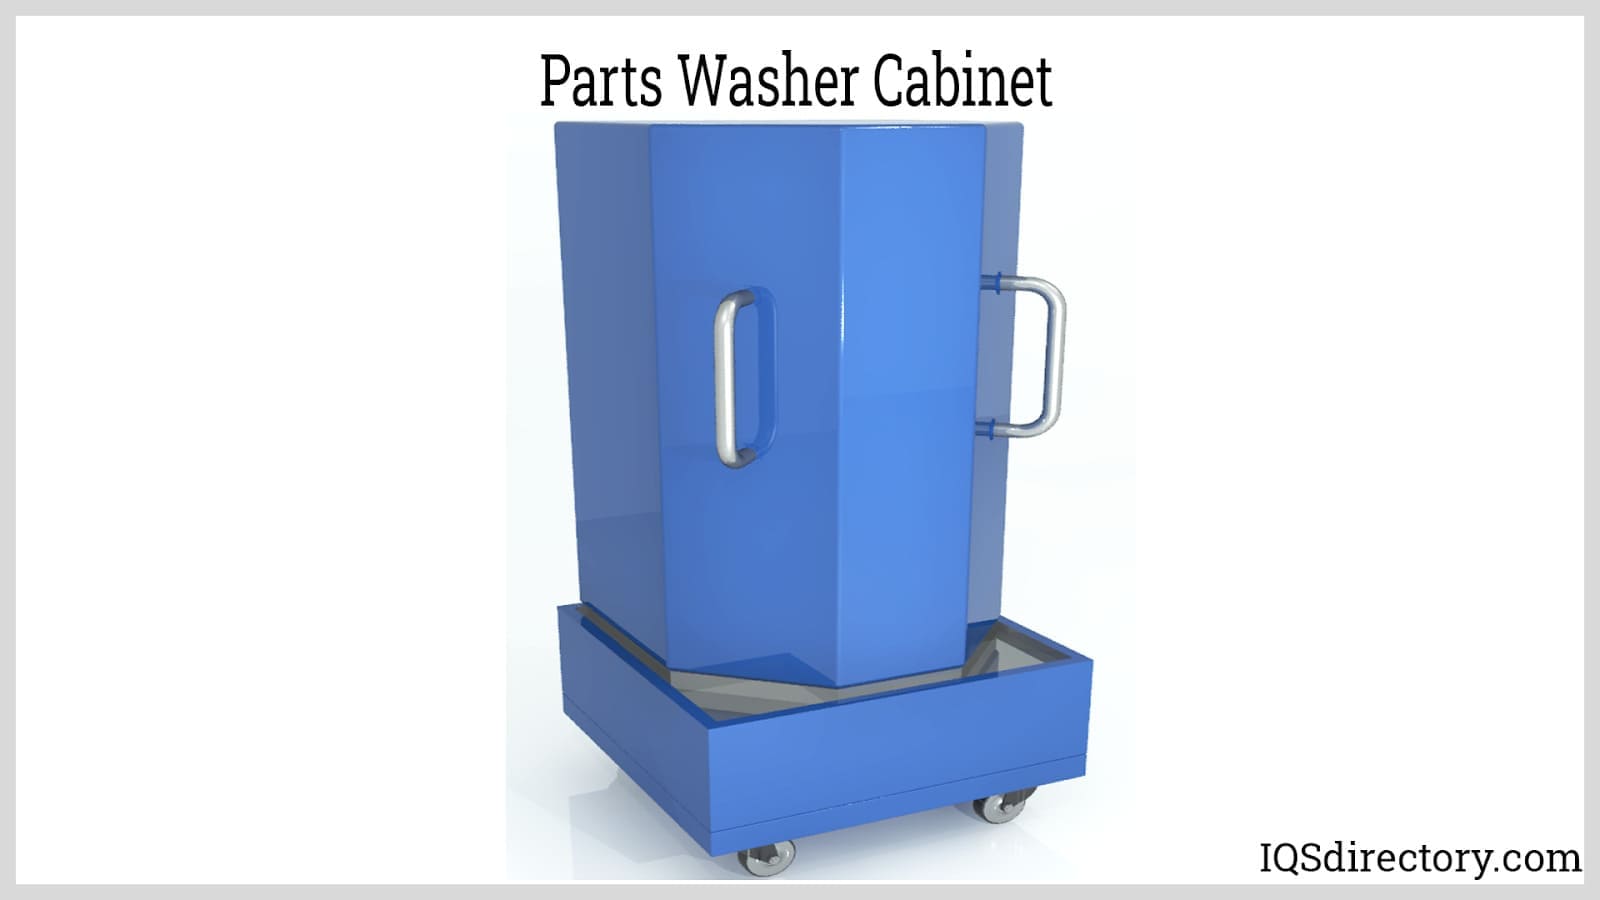 Parts Washer Cabinet